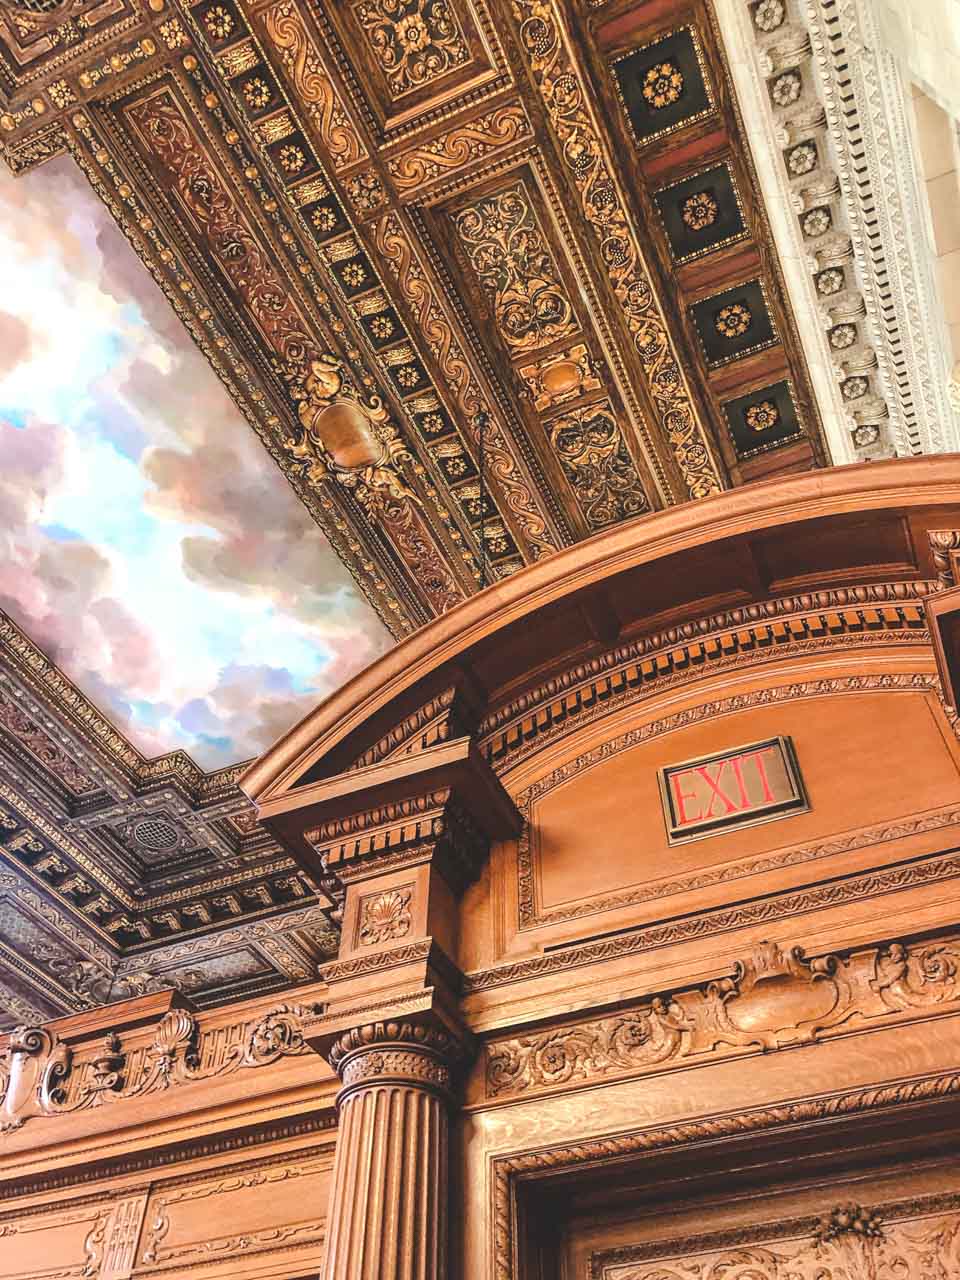 The ceiling above the Exit sign inside the New York Public Library